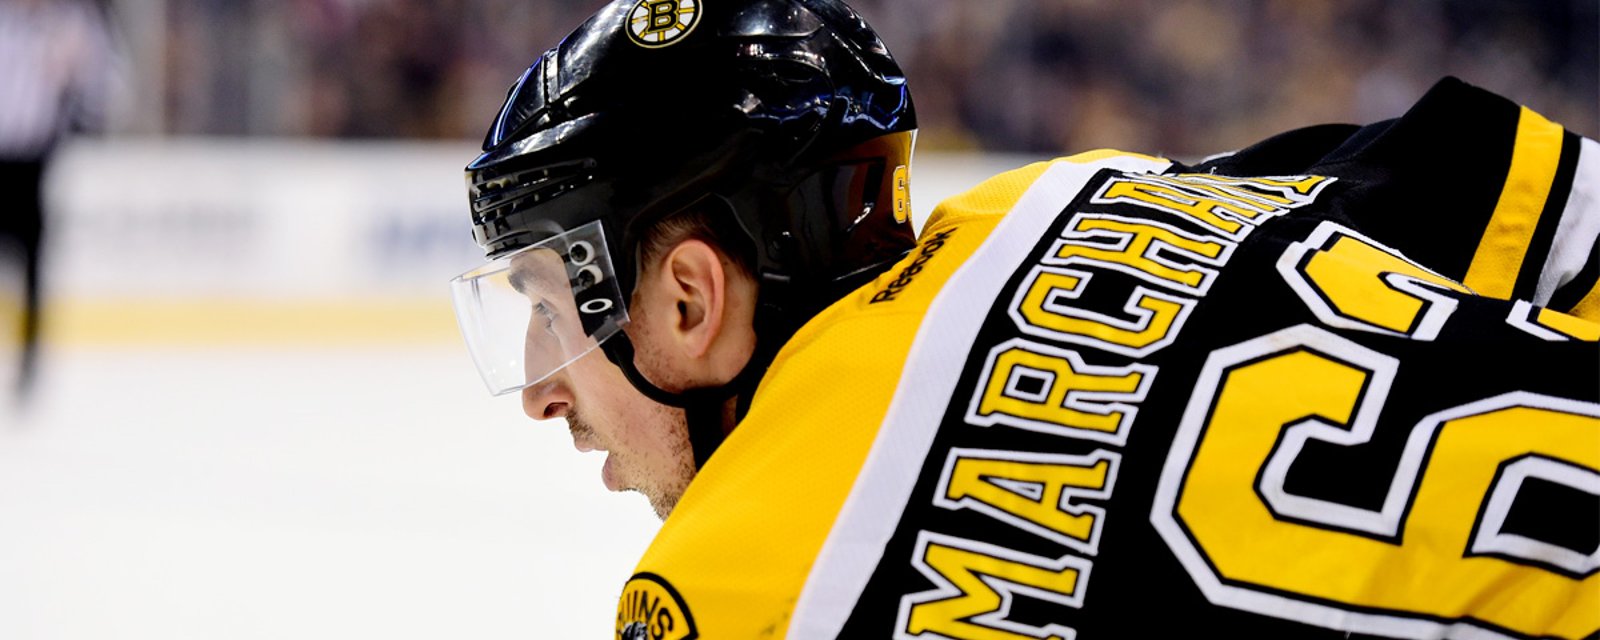 Fan gets roasted by Marchand over Twitter comments